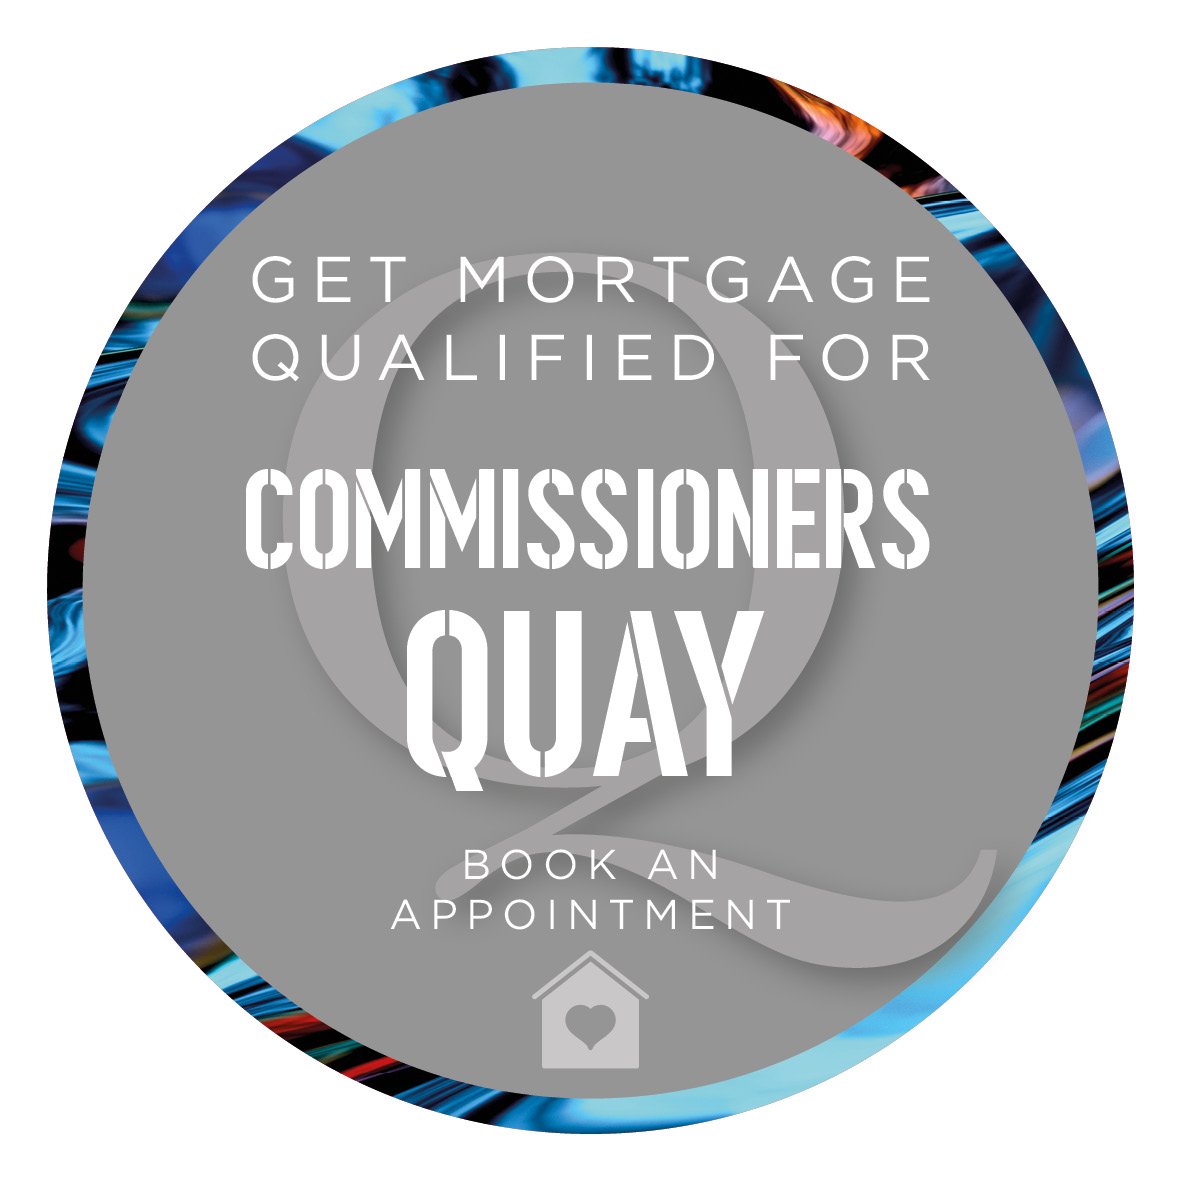 Get Mortgage Qualified at CQ4.jpg